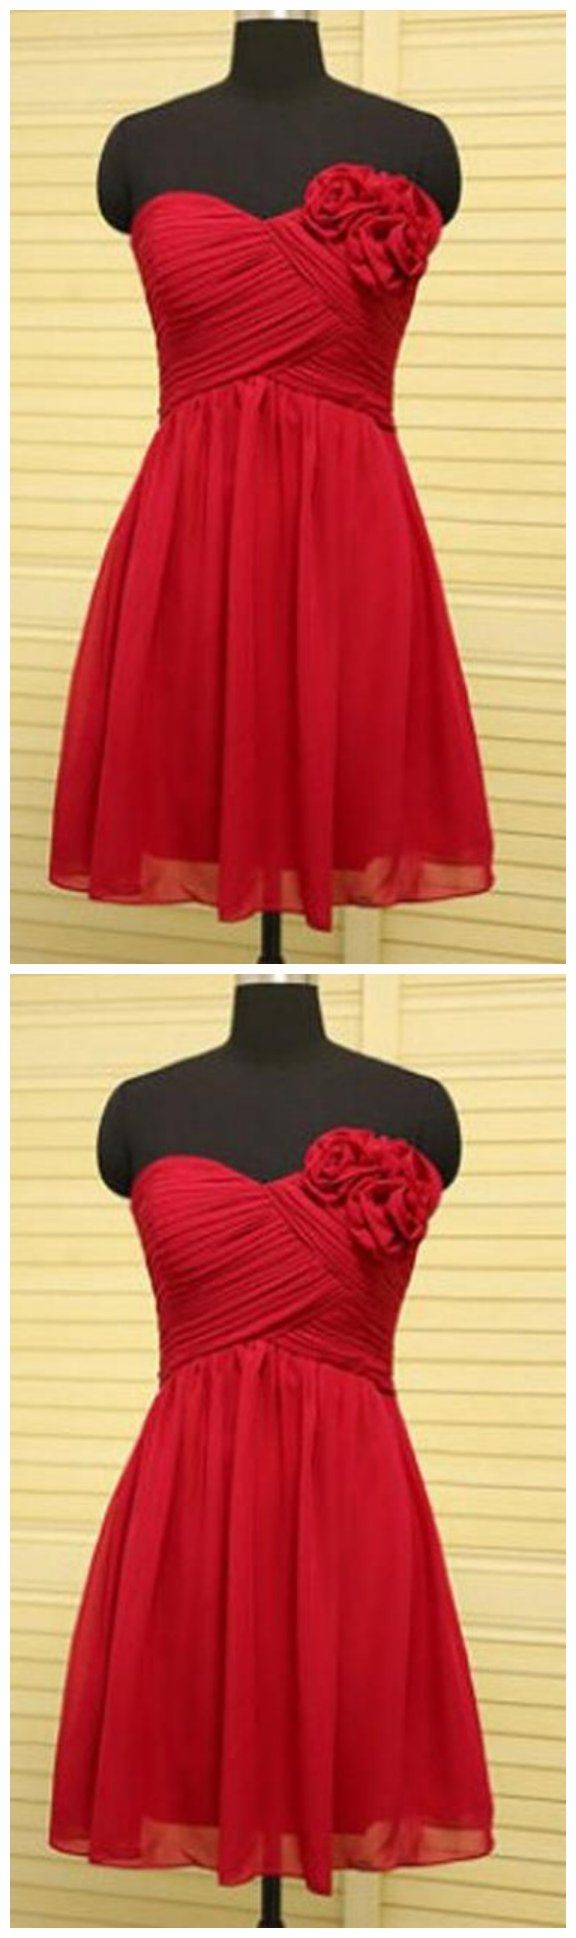 Red Sweetheart Short Homecoming Dresses Affordable Cocktail Dresses With Flower